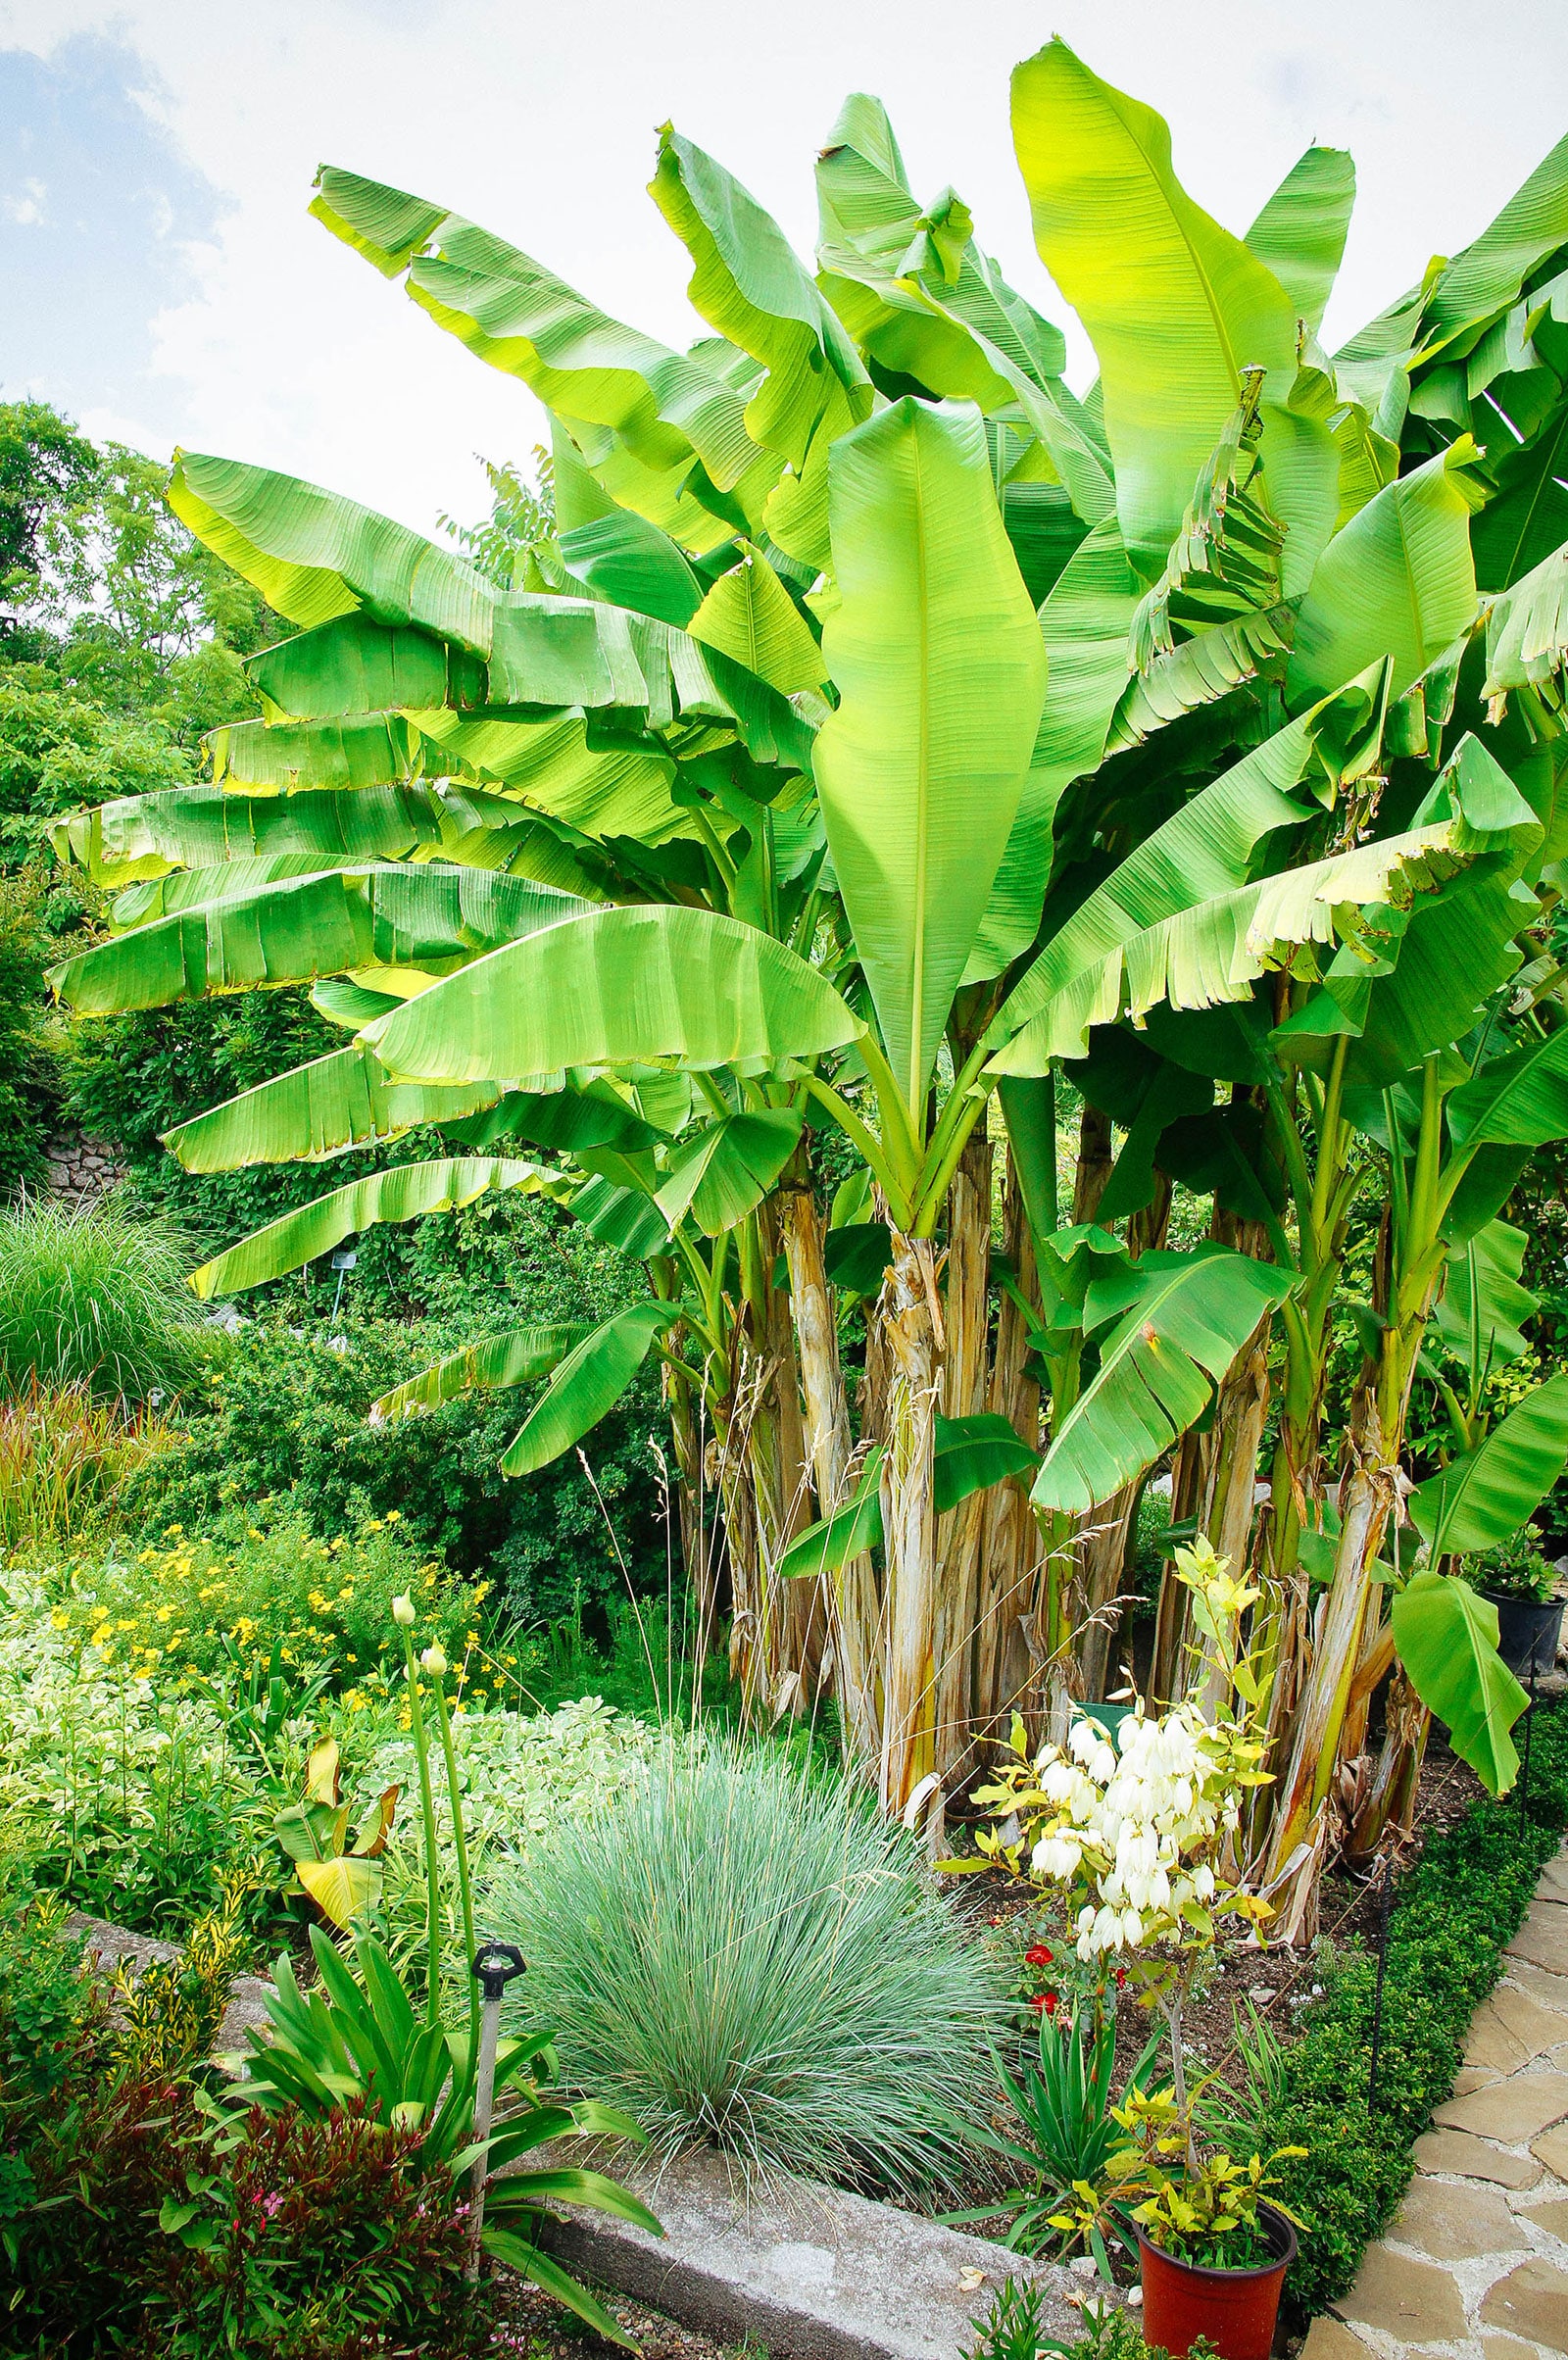 A grove of large banana plants growing in a home garden with other landscaping plants